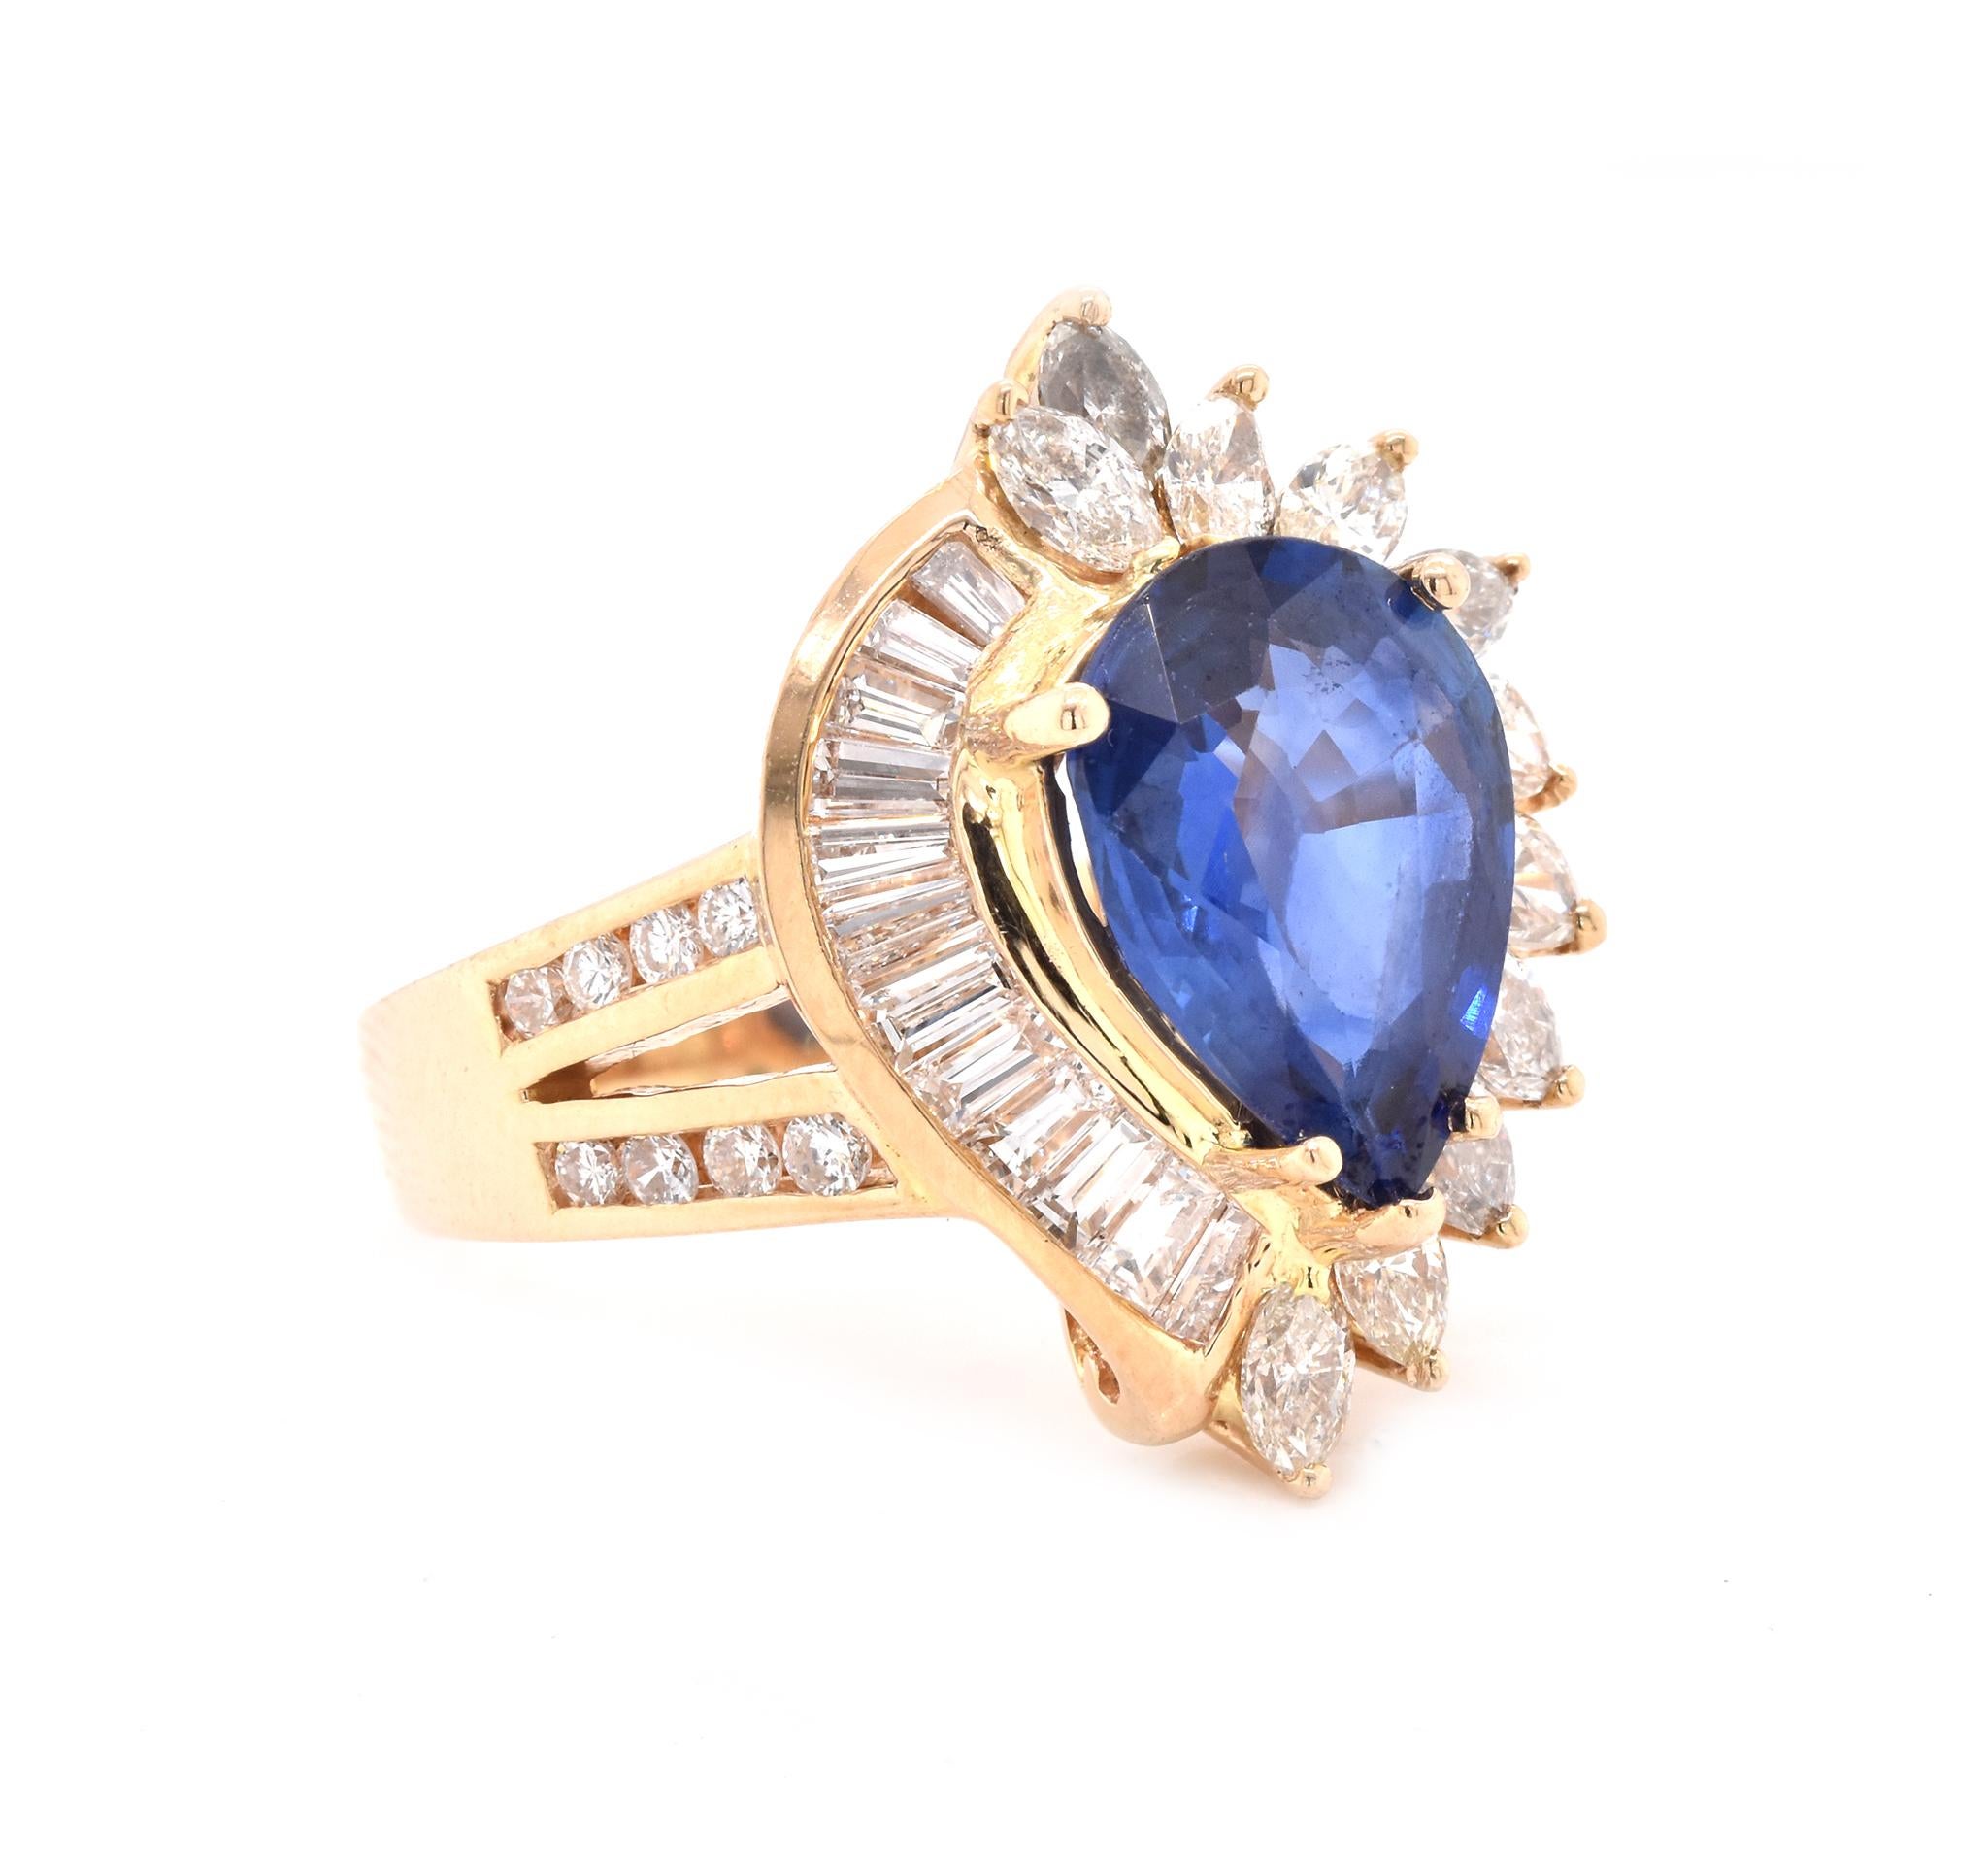 Material: 14K yellow gold 
Diamond: 39 round, baguette, and marquise cut = 1.13cttw
Color: J-M
Clarity: SI1
Sapphire: 1 pear cut = 3.30ct
Ring Size: 6 (please allow up to 2 additional business days for sizing requests)
Dimensions: ring top measures